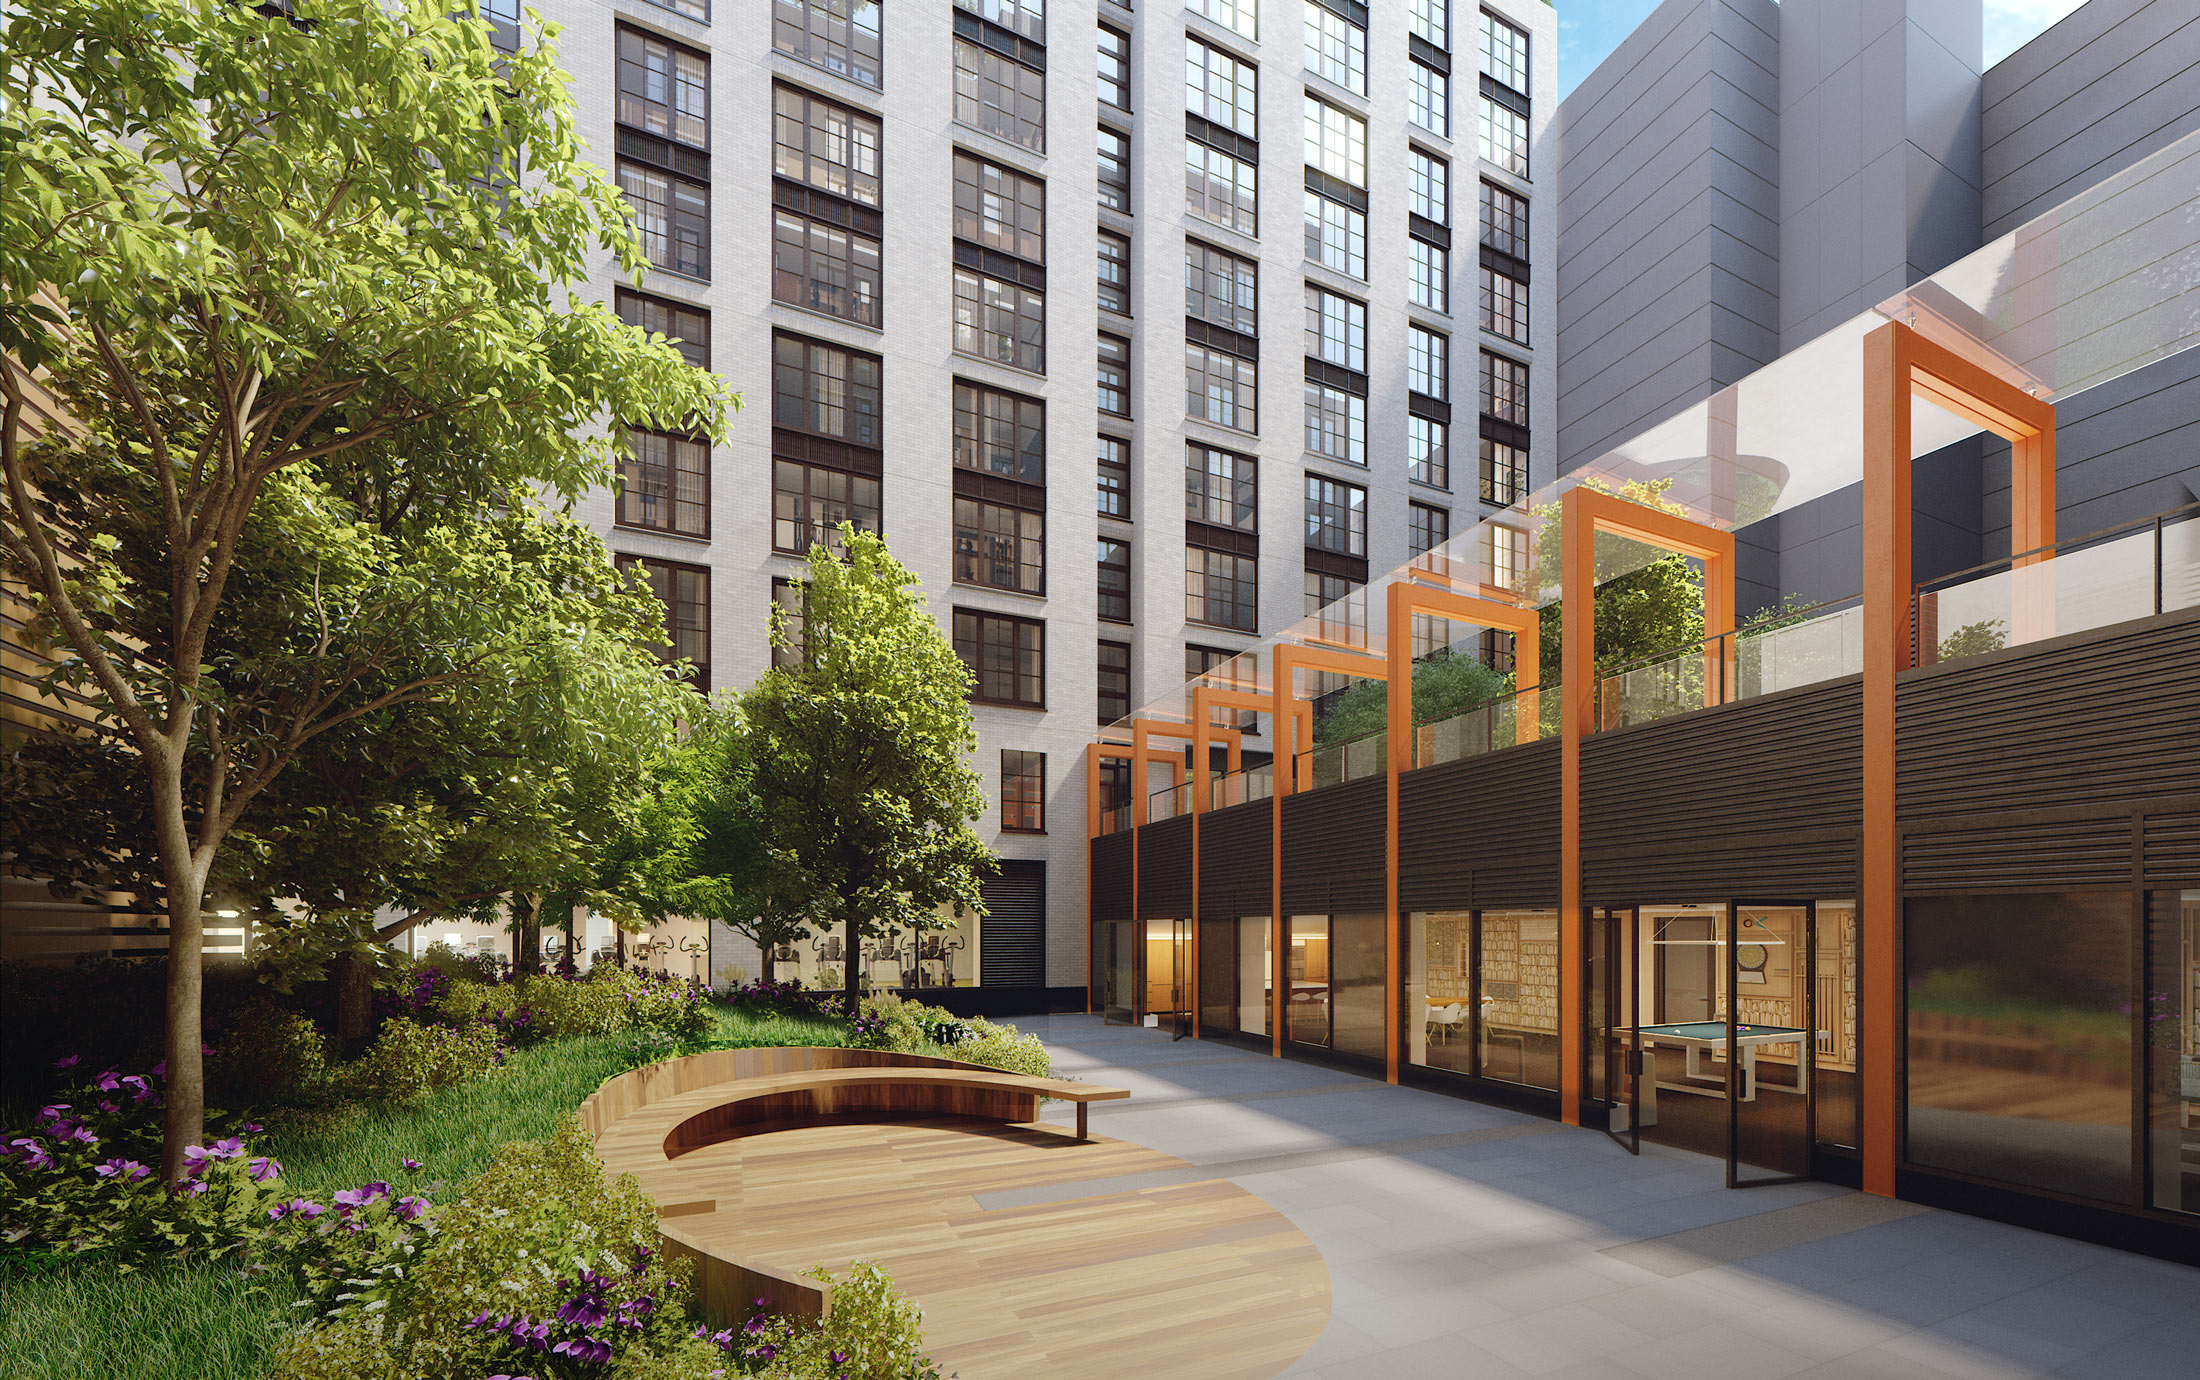 Architectural Rendering of the courtyard of the 535 West 43rd Street project located in Hell’s Kitchen, New York City